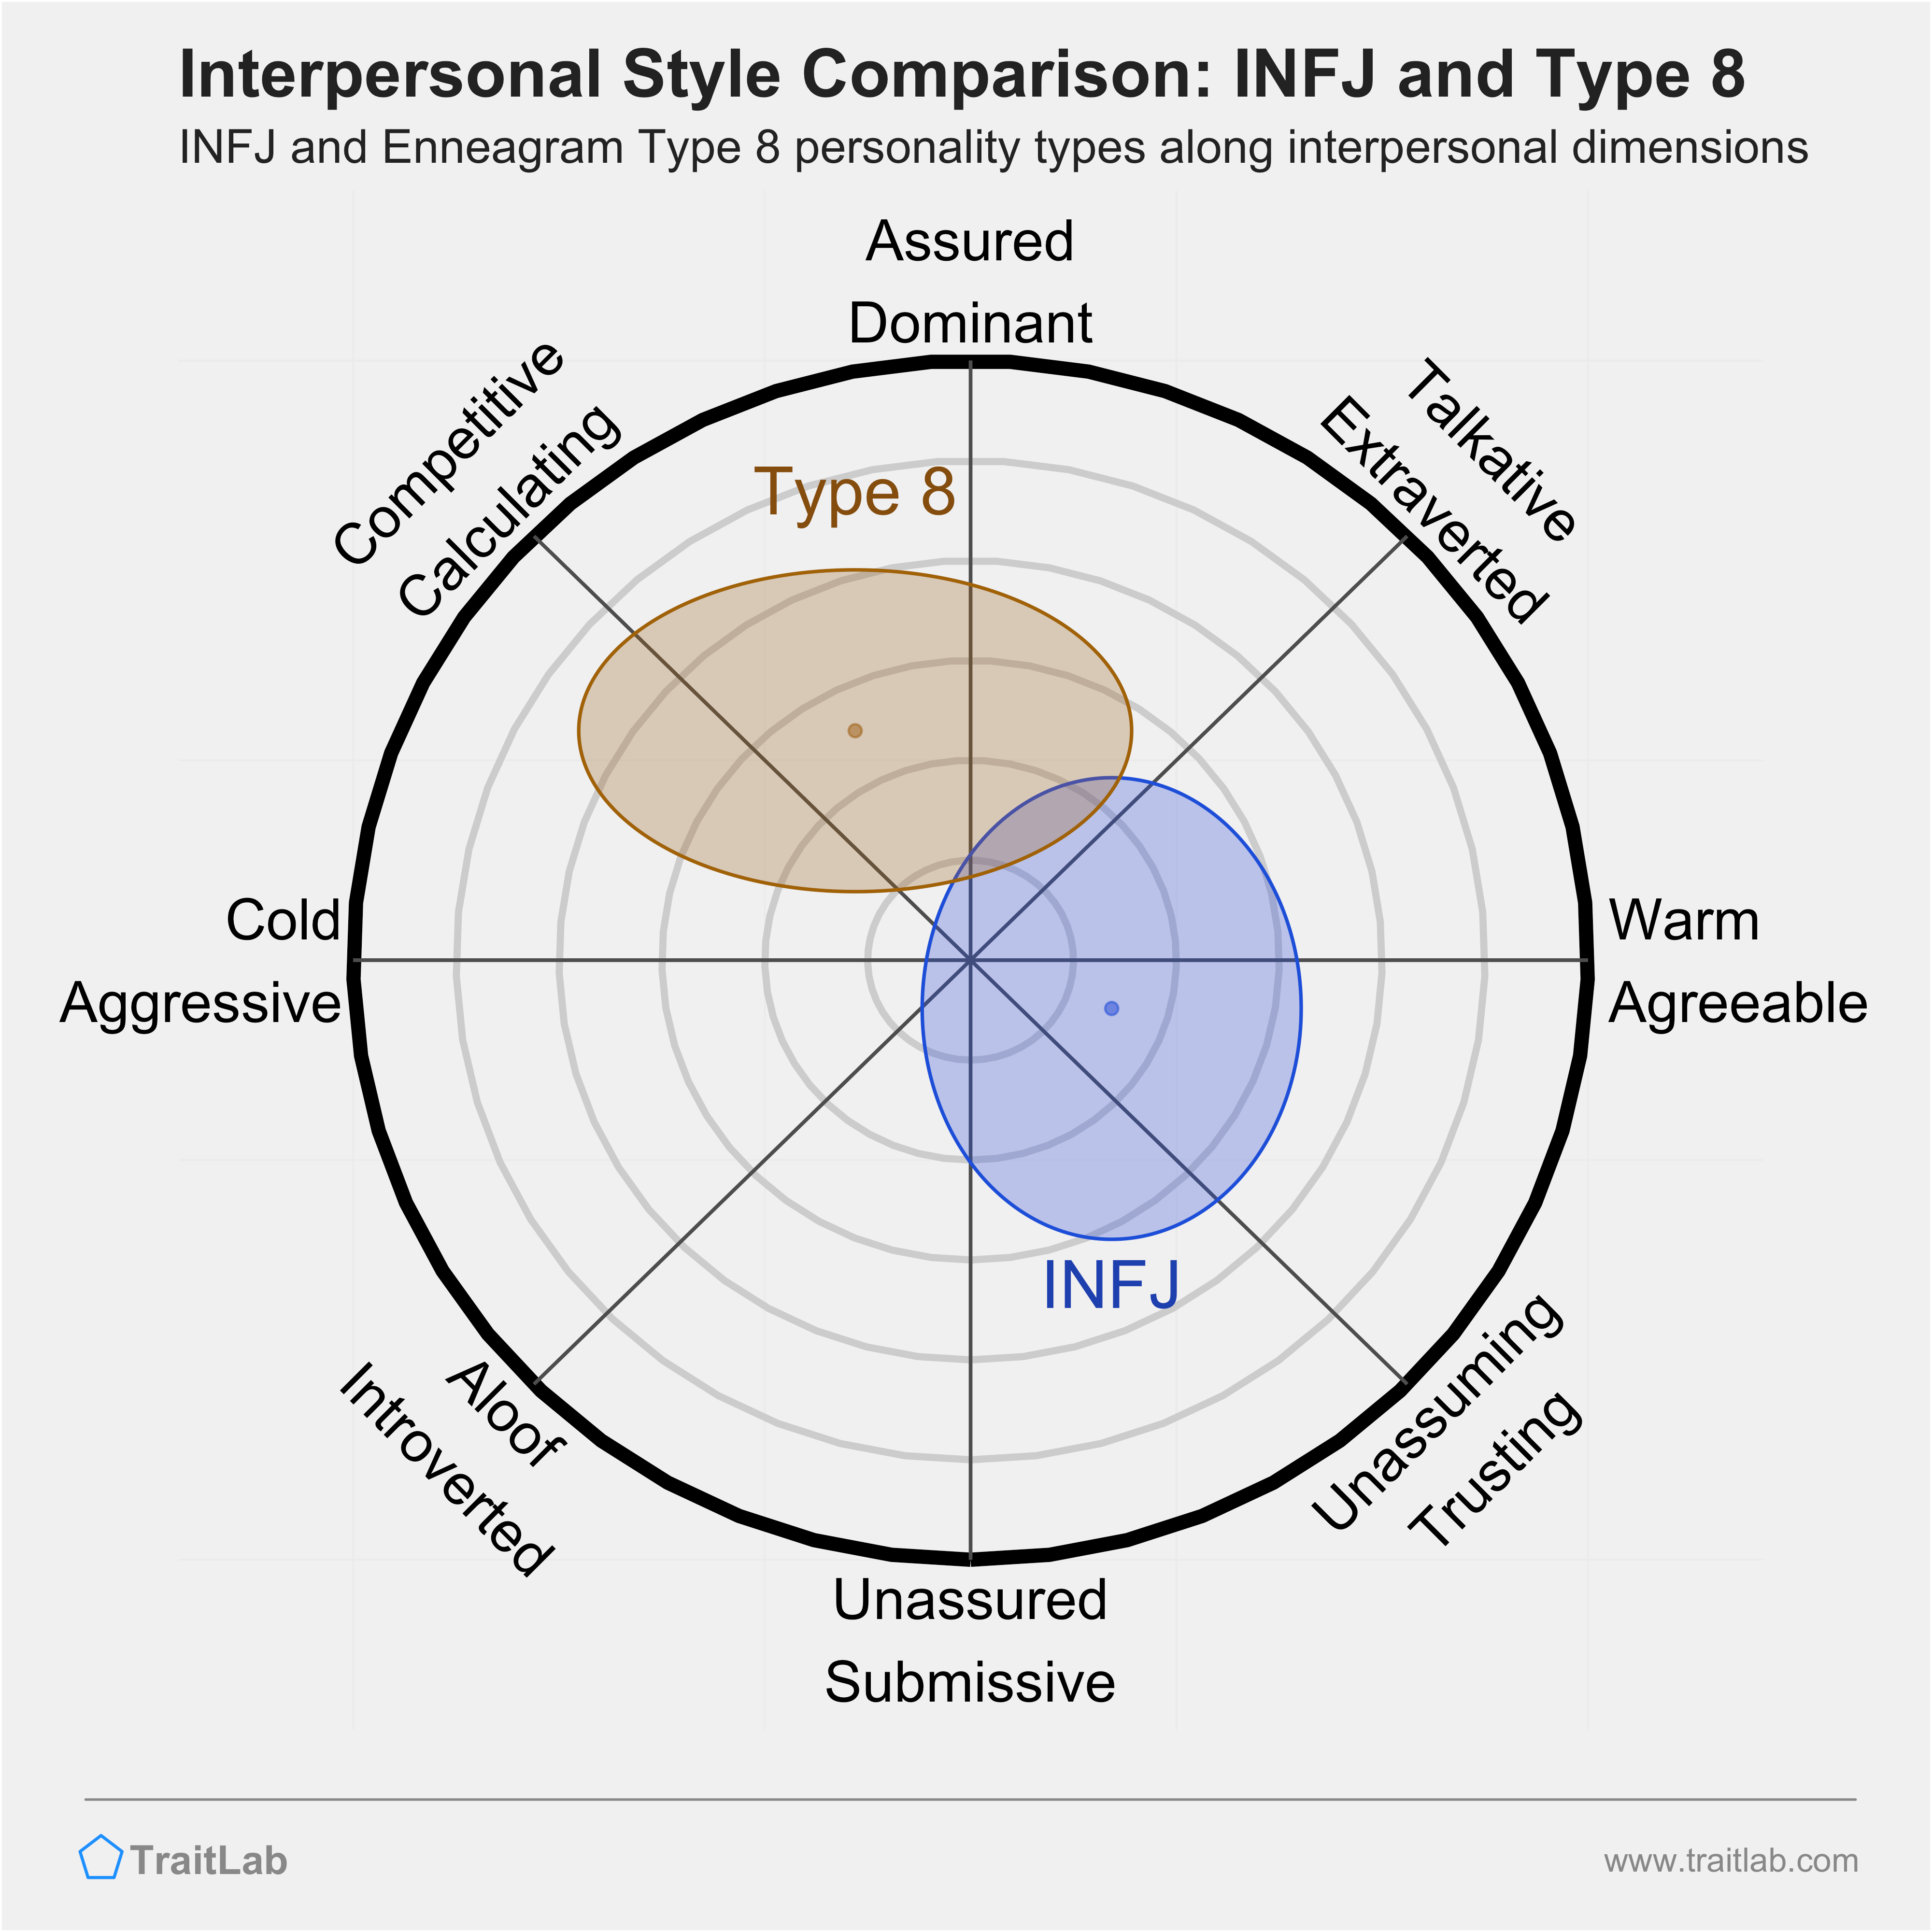 Enneagram INFJ and Type 8 comparison across interpersonal dimensions